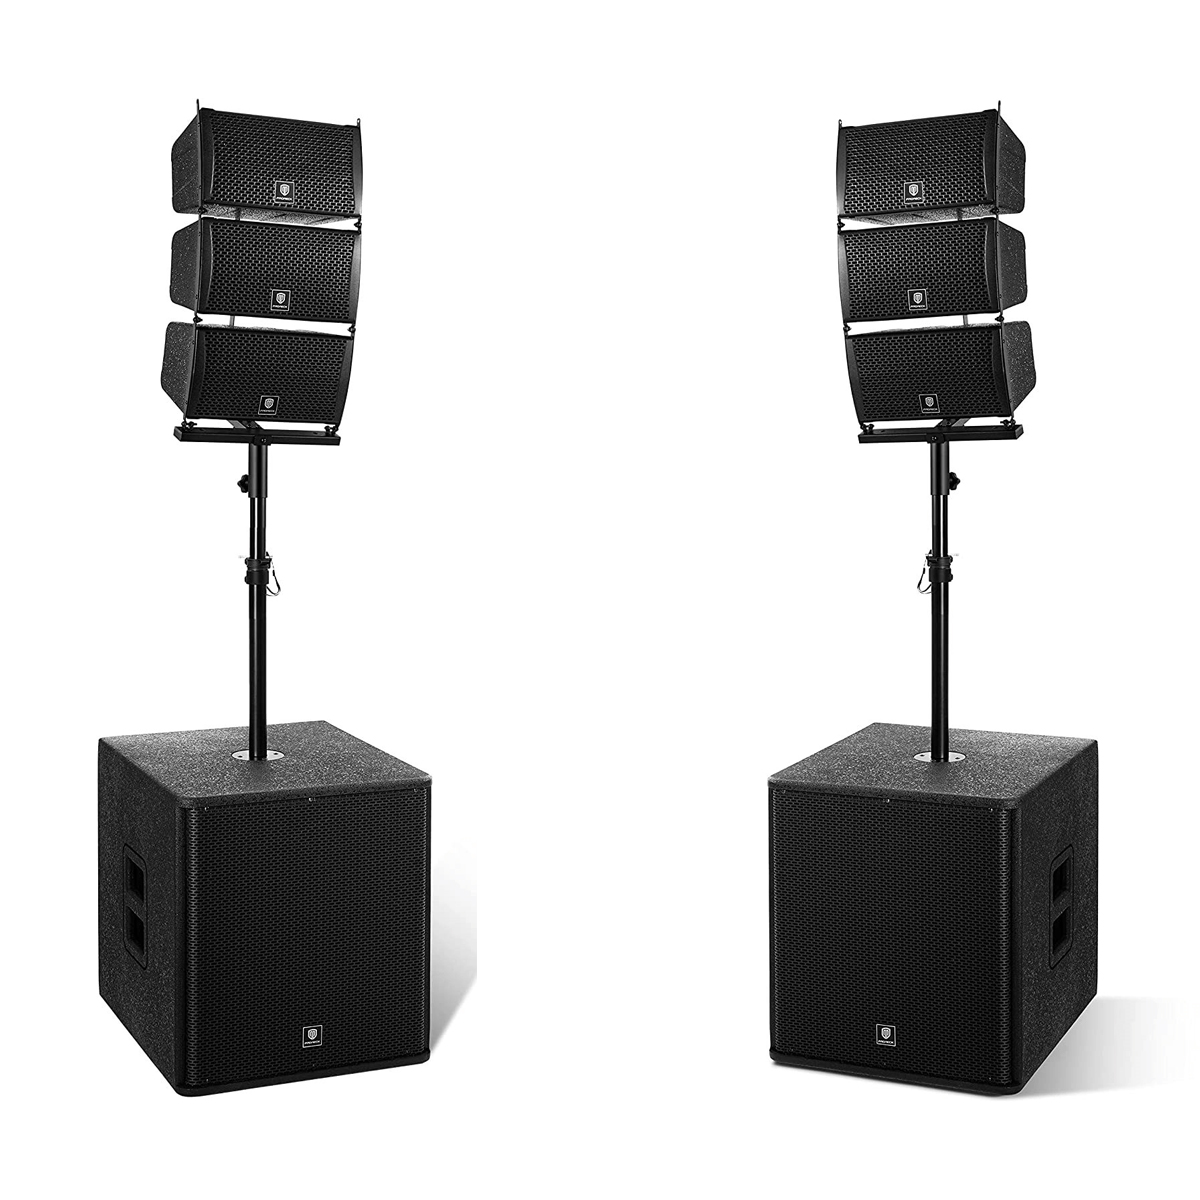 Proreck speakers Line array speakers | Large PA system